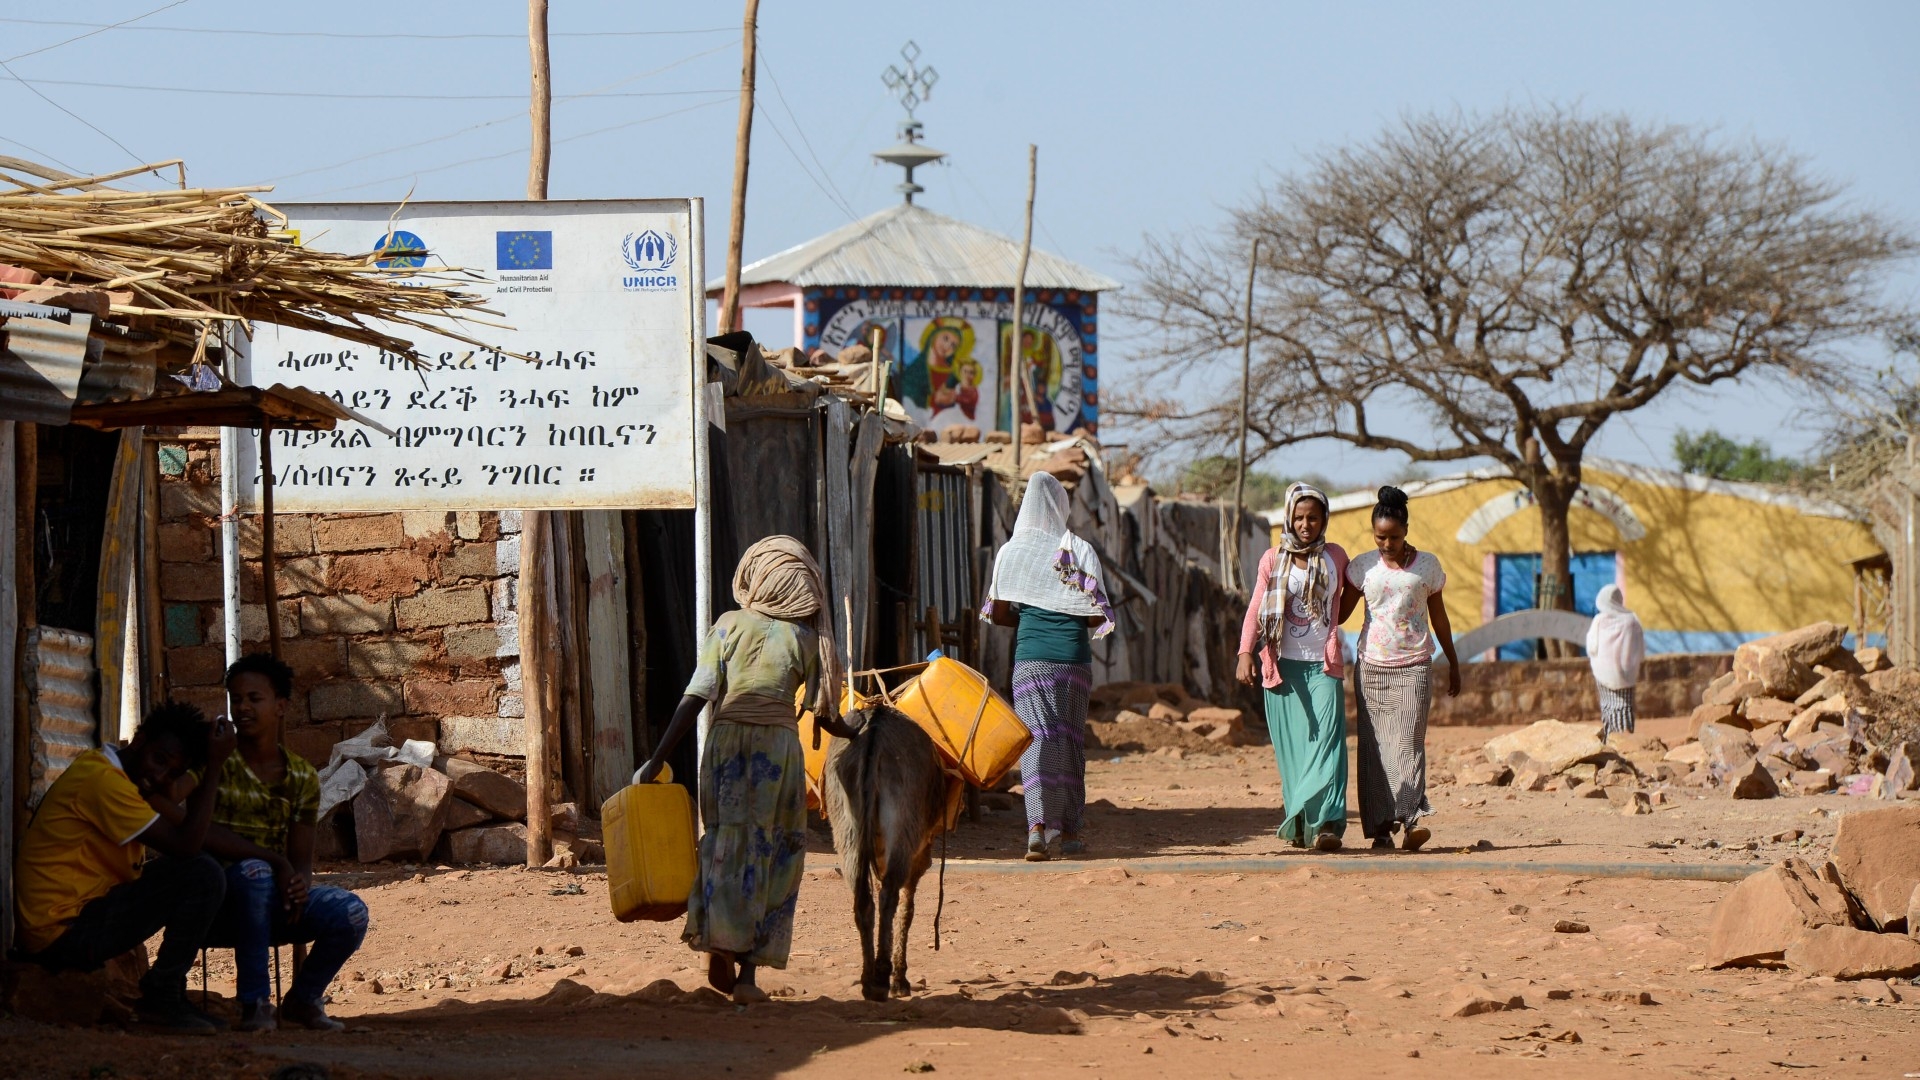 Ethiopian and Eritrean women in a refugee camp managed by the UNHCR